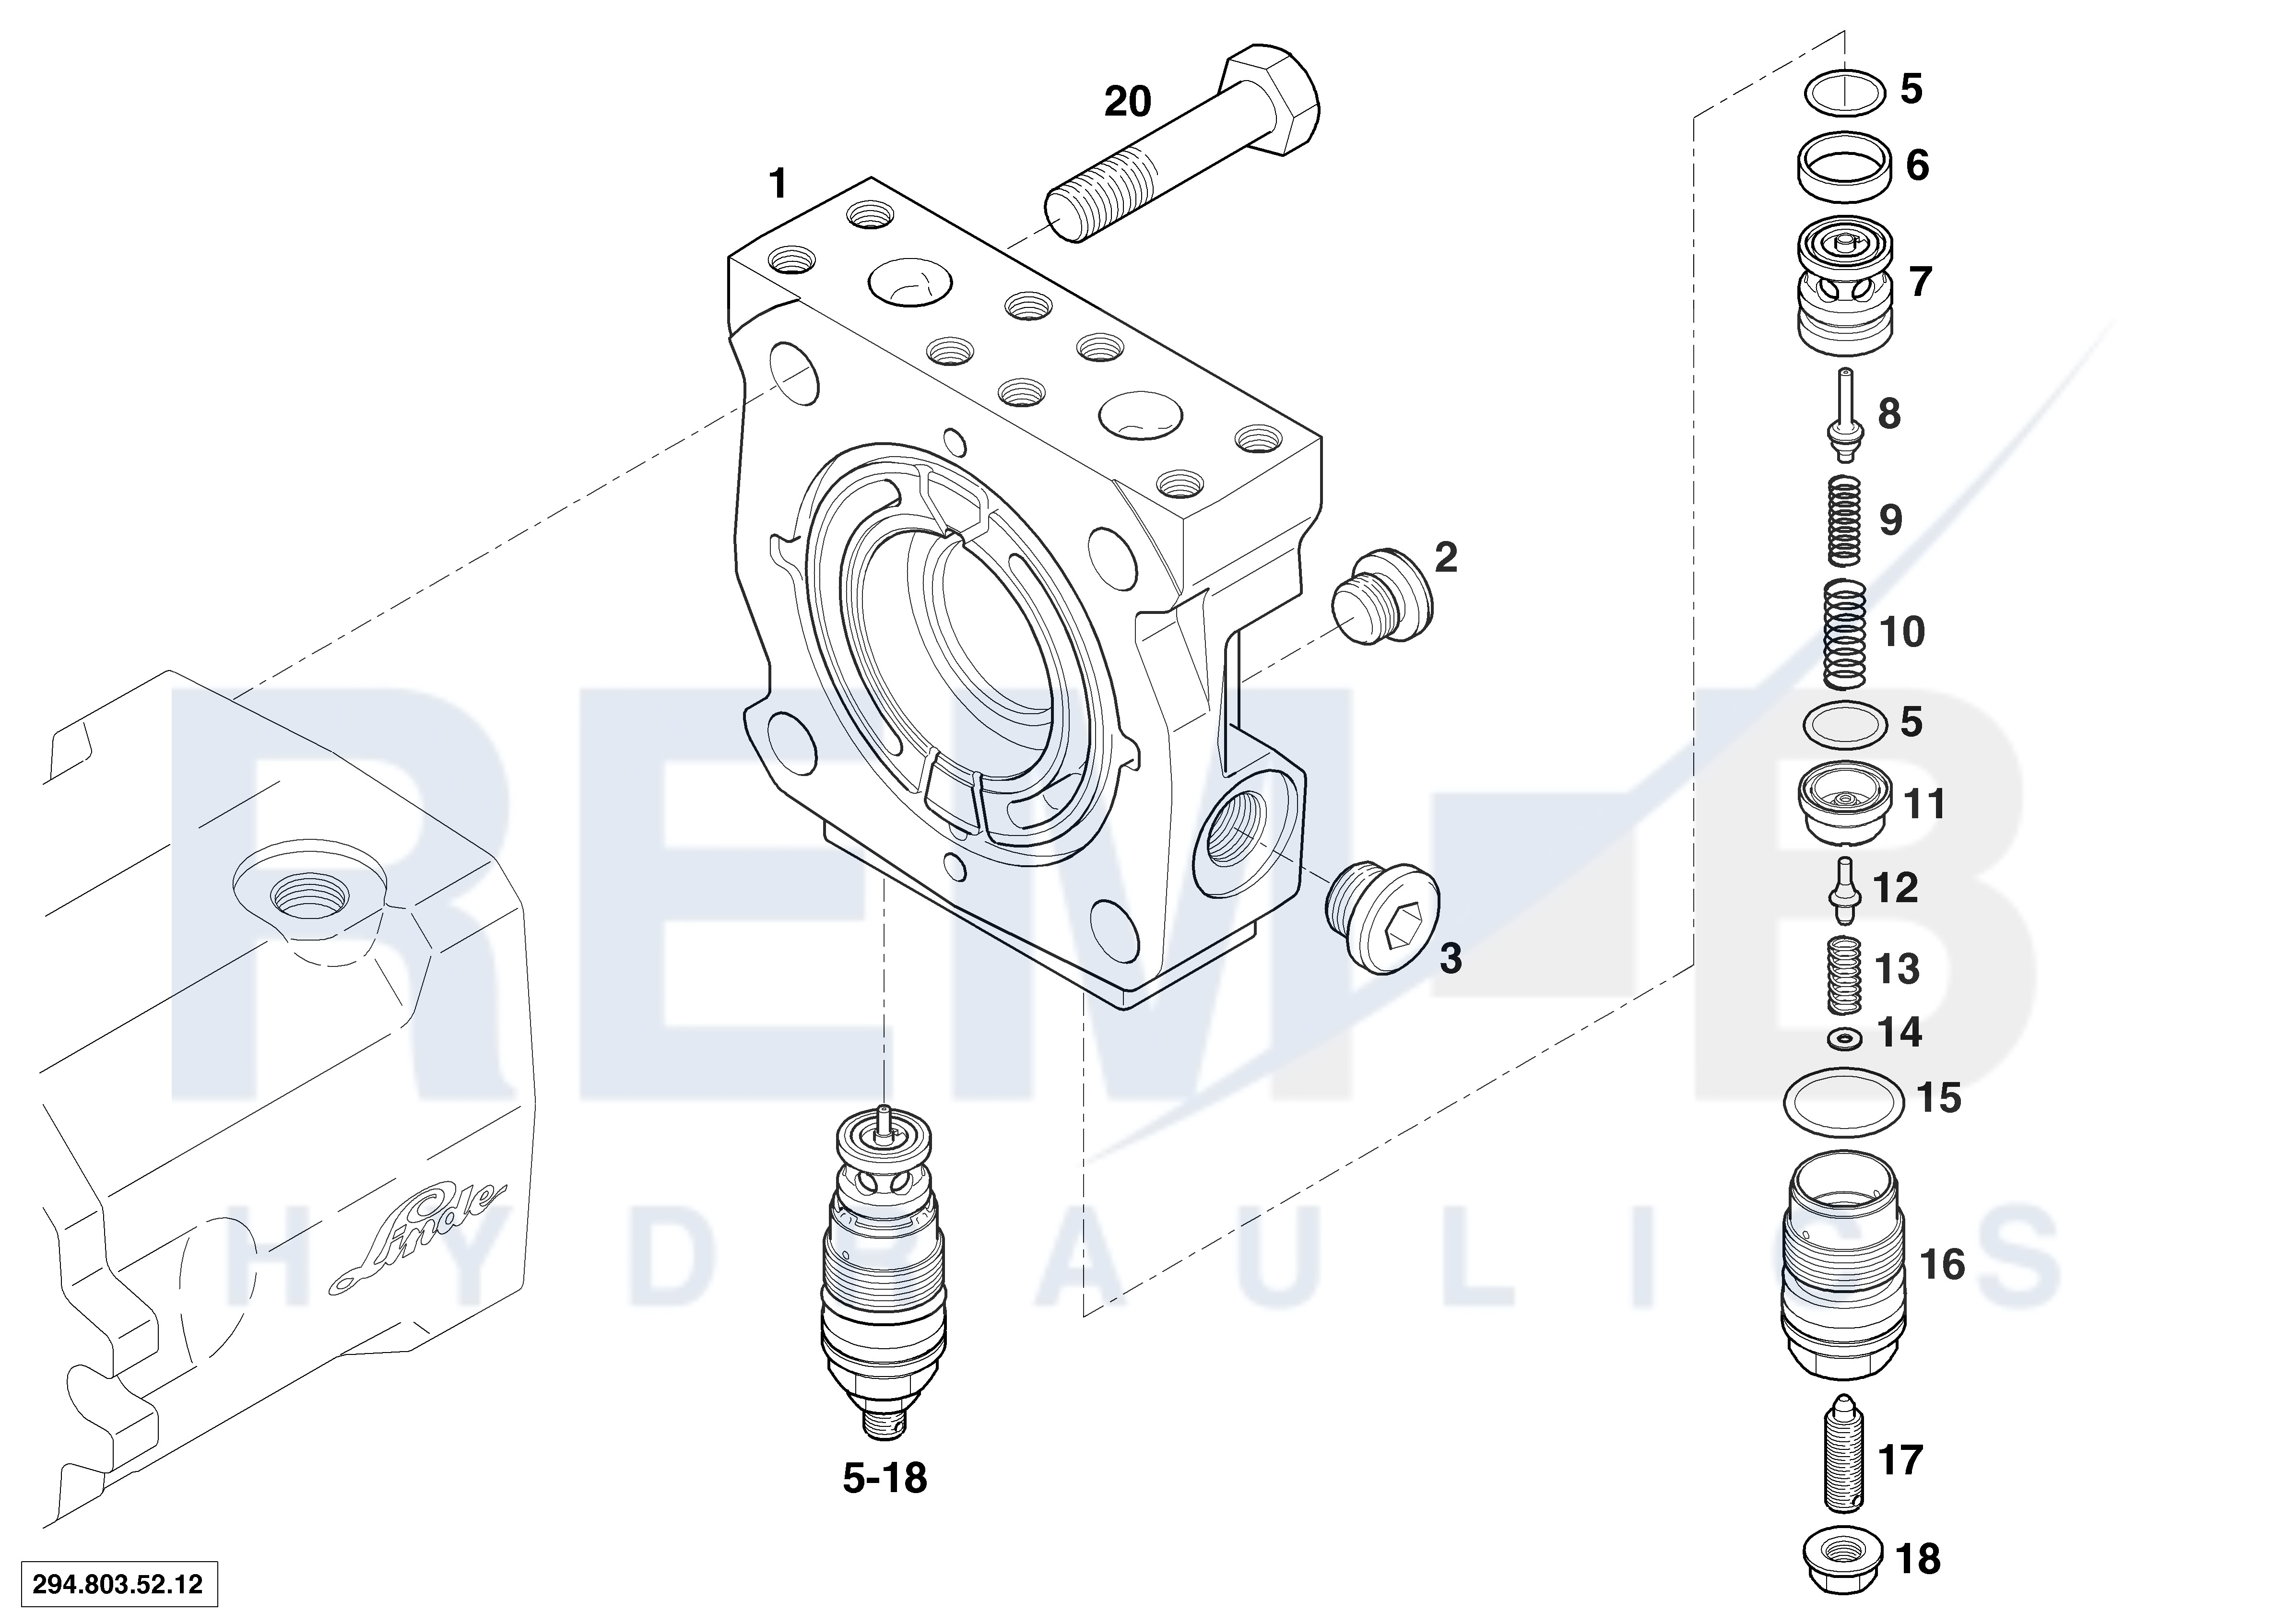 REAR COVER AND PRESSURE CONTROL VALVE VD20-04